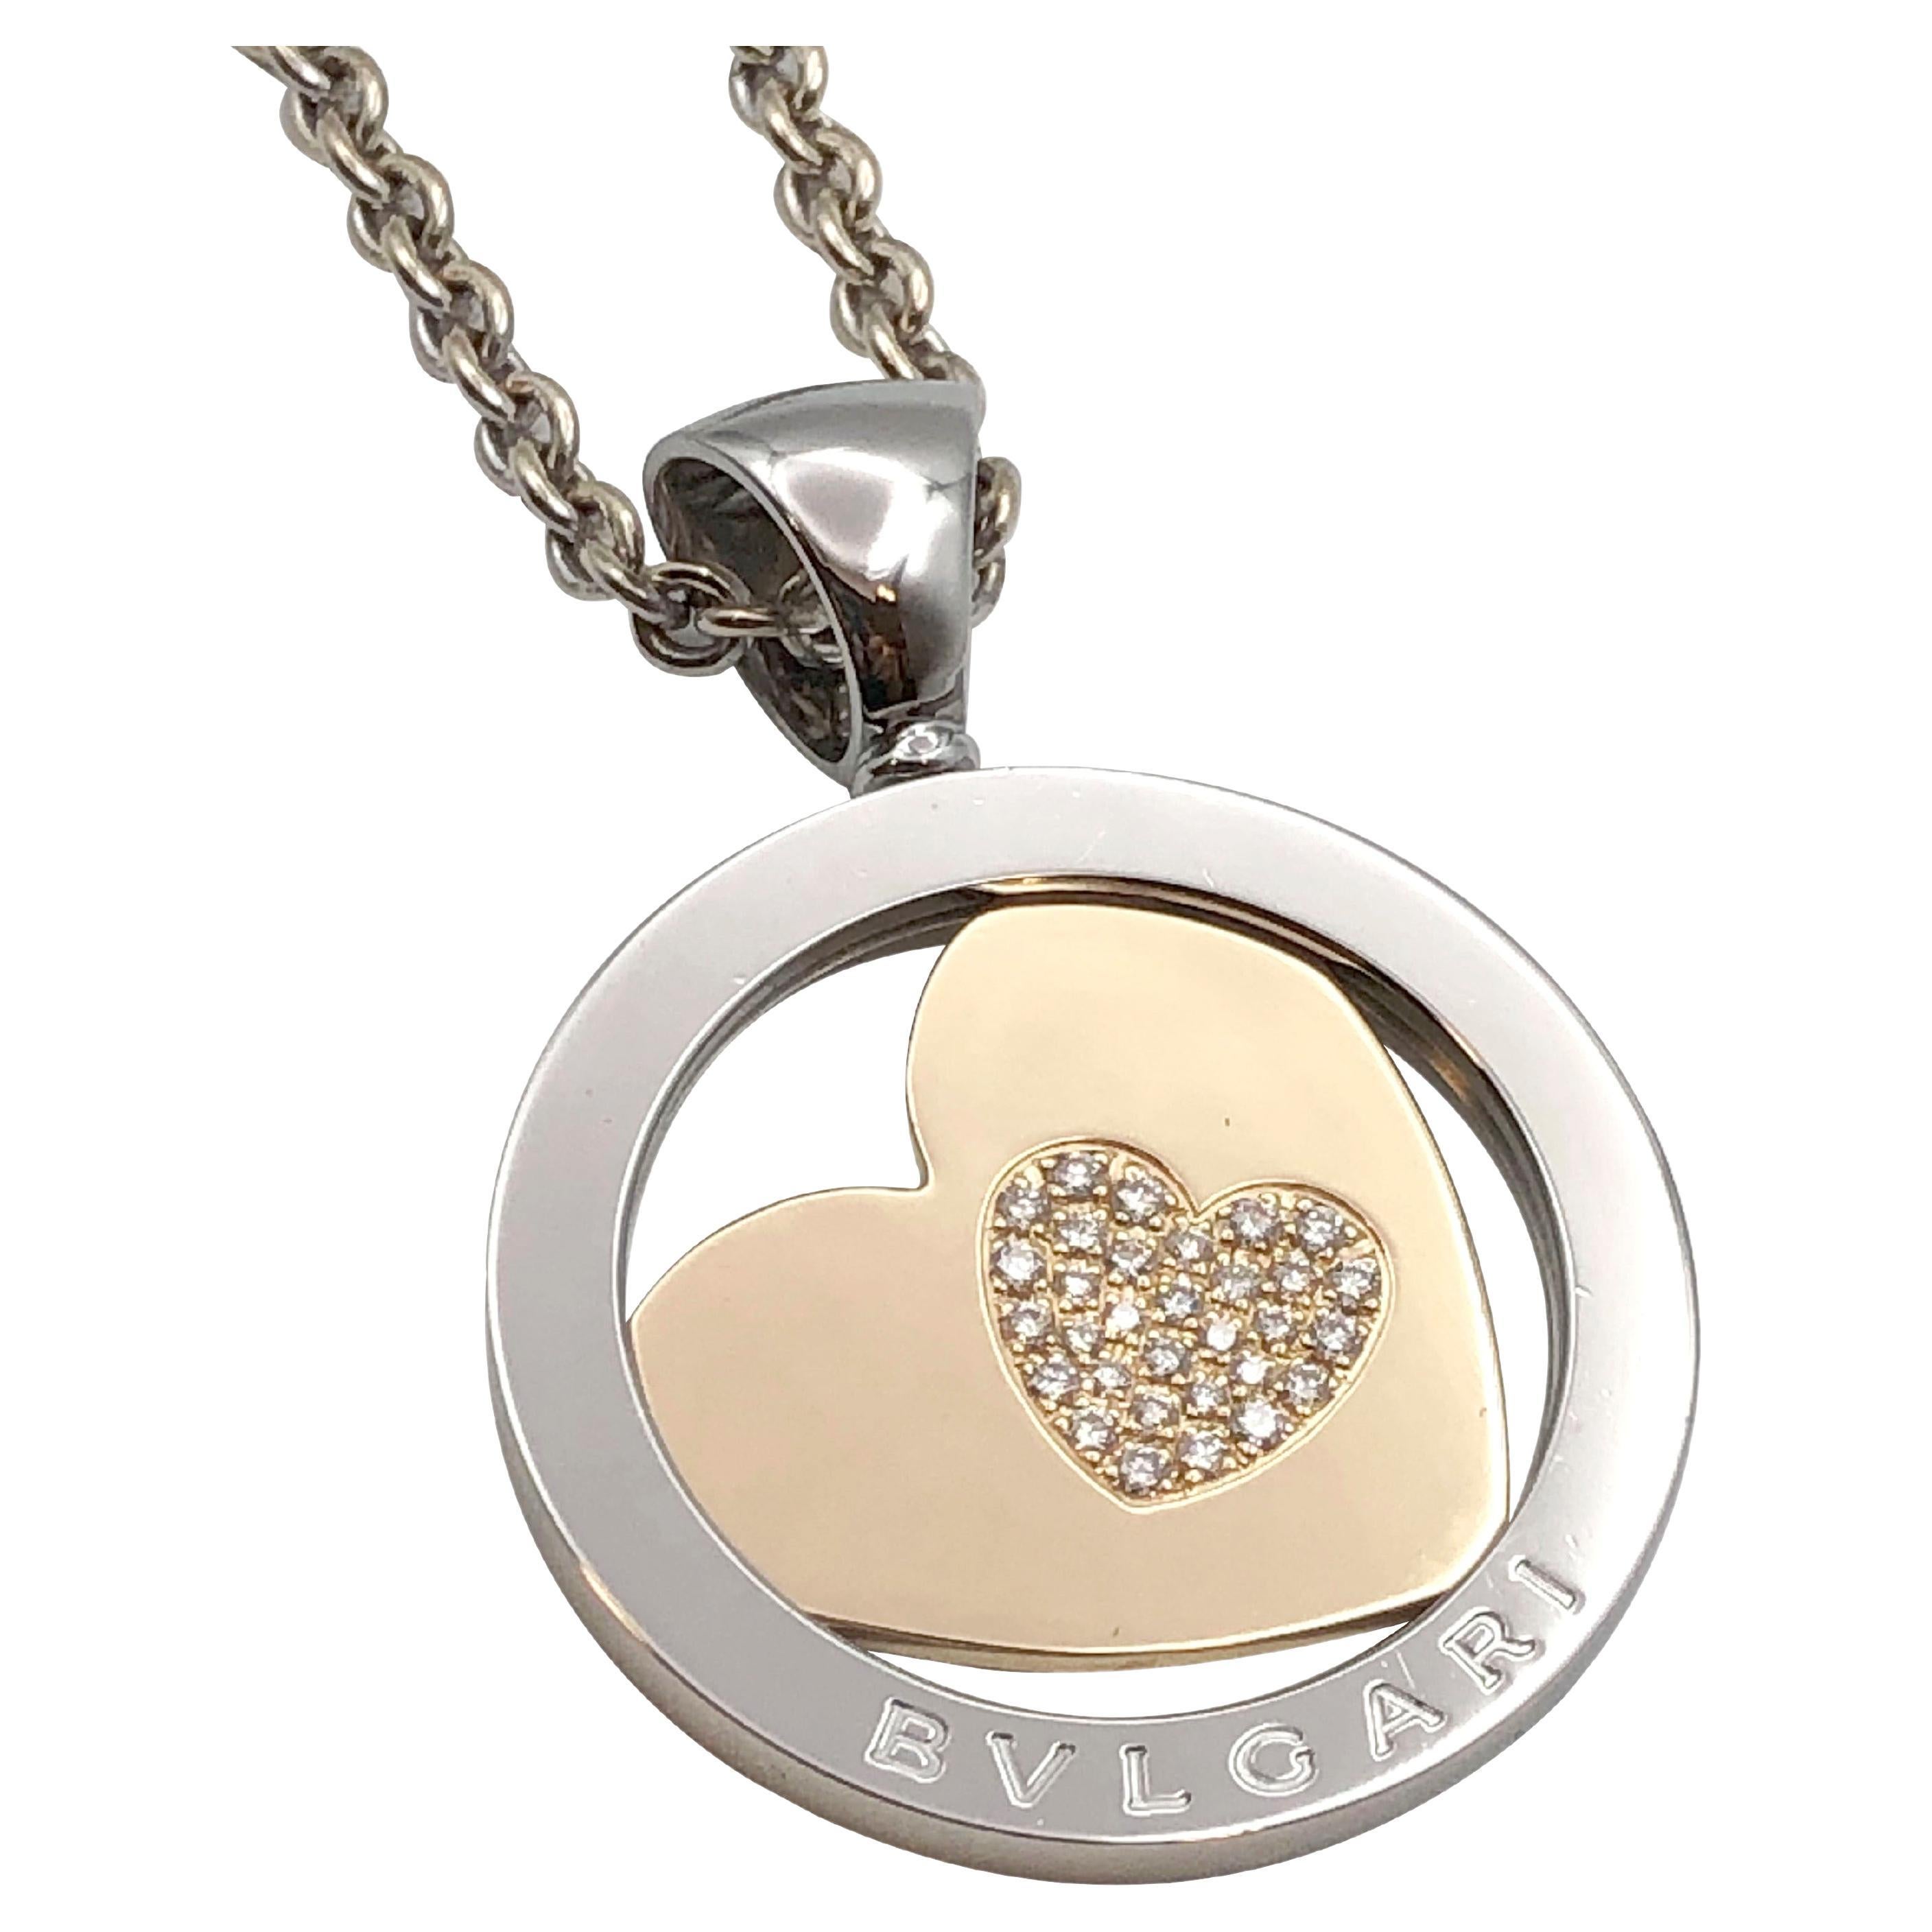 Circa:  2015 Bulgari Tondo Collection Necklace, 1 1/2 inch X 1 1/4 inch Circular pendant of Stainless Steel with an 18K Yellow Gold Heart with round Brilliant cut diamonds set into the very center. Suspended from a 27 inch 18K White Gold adjustable